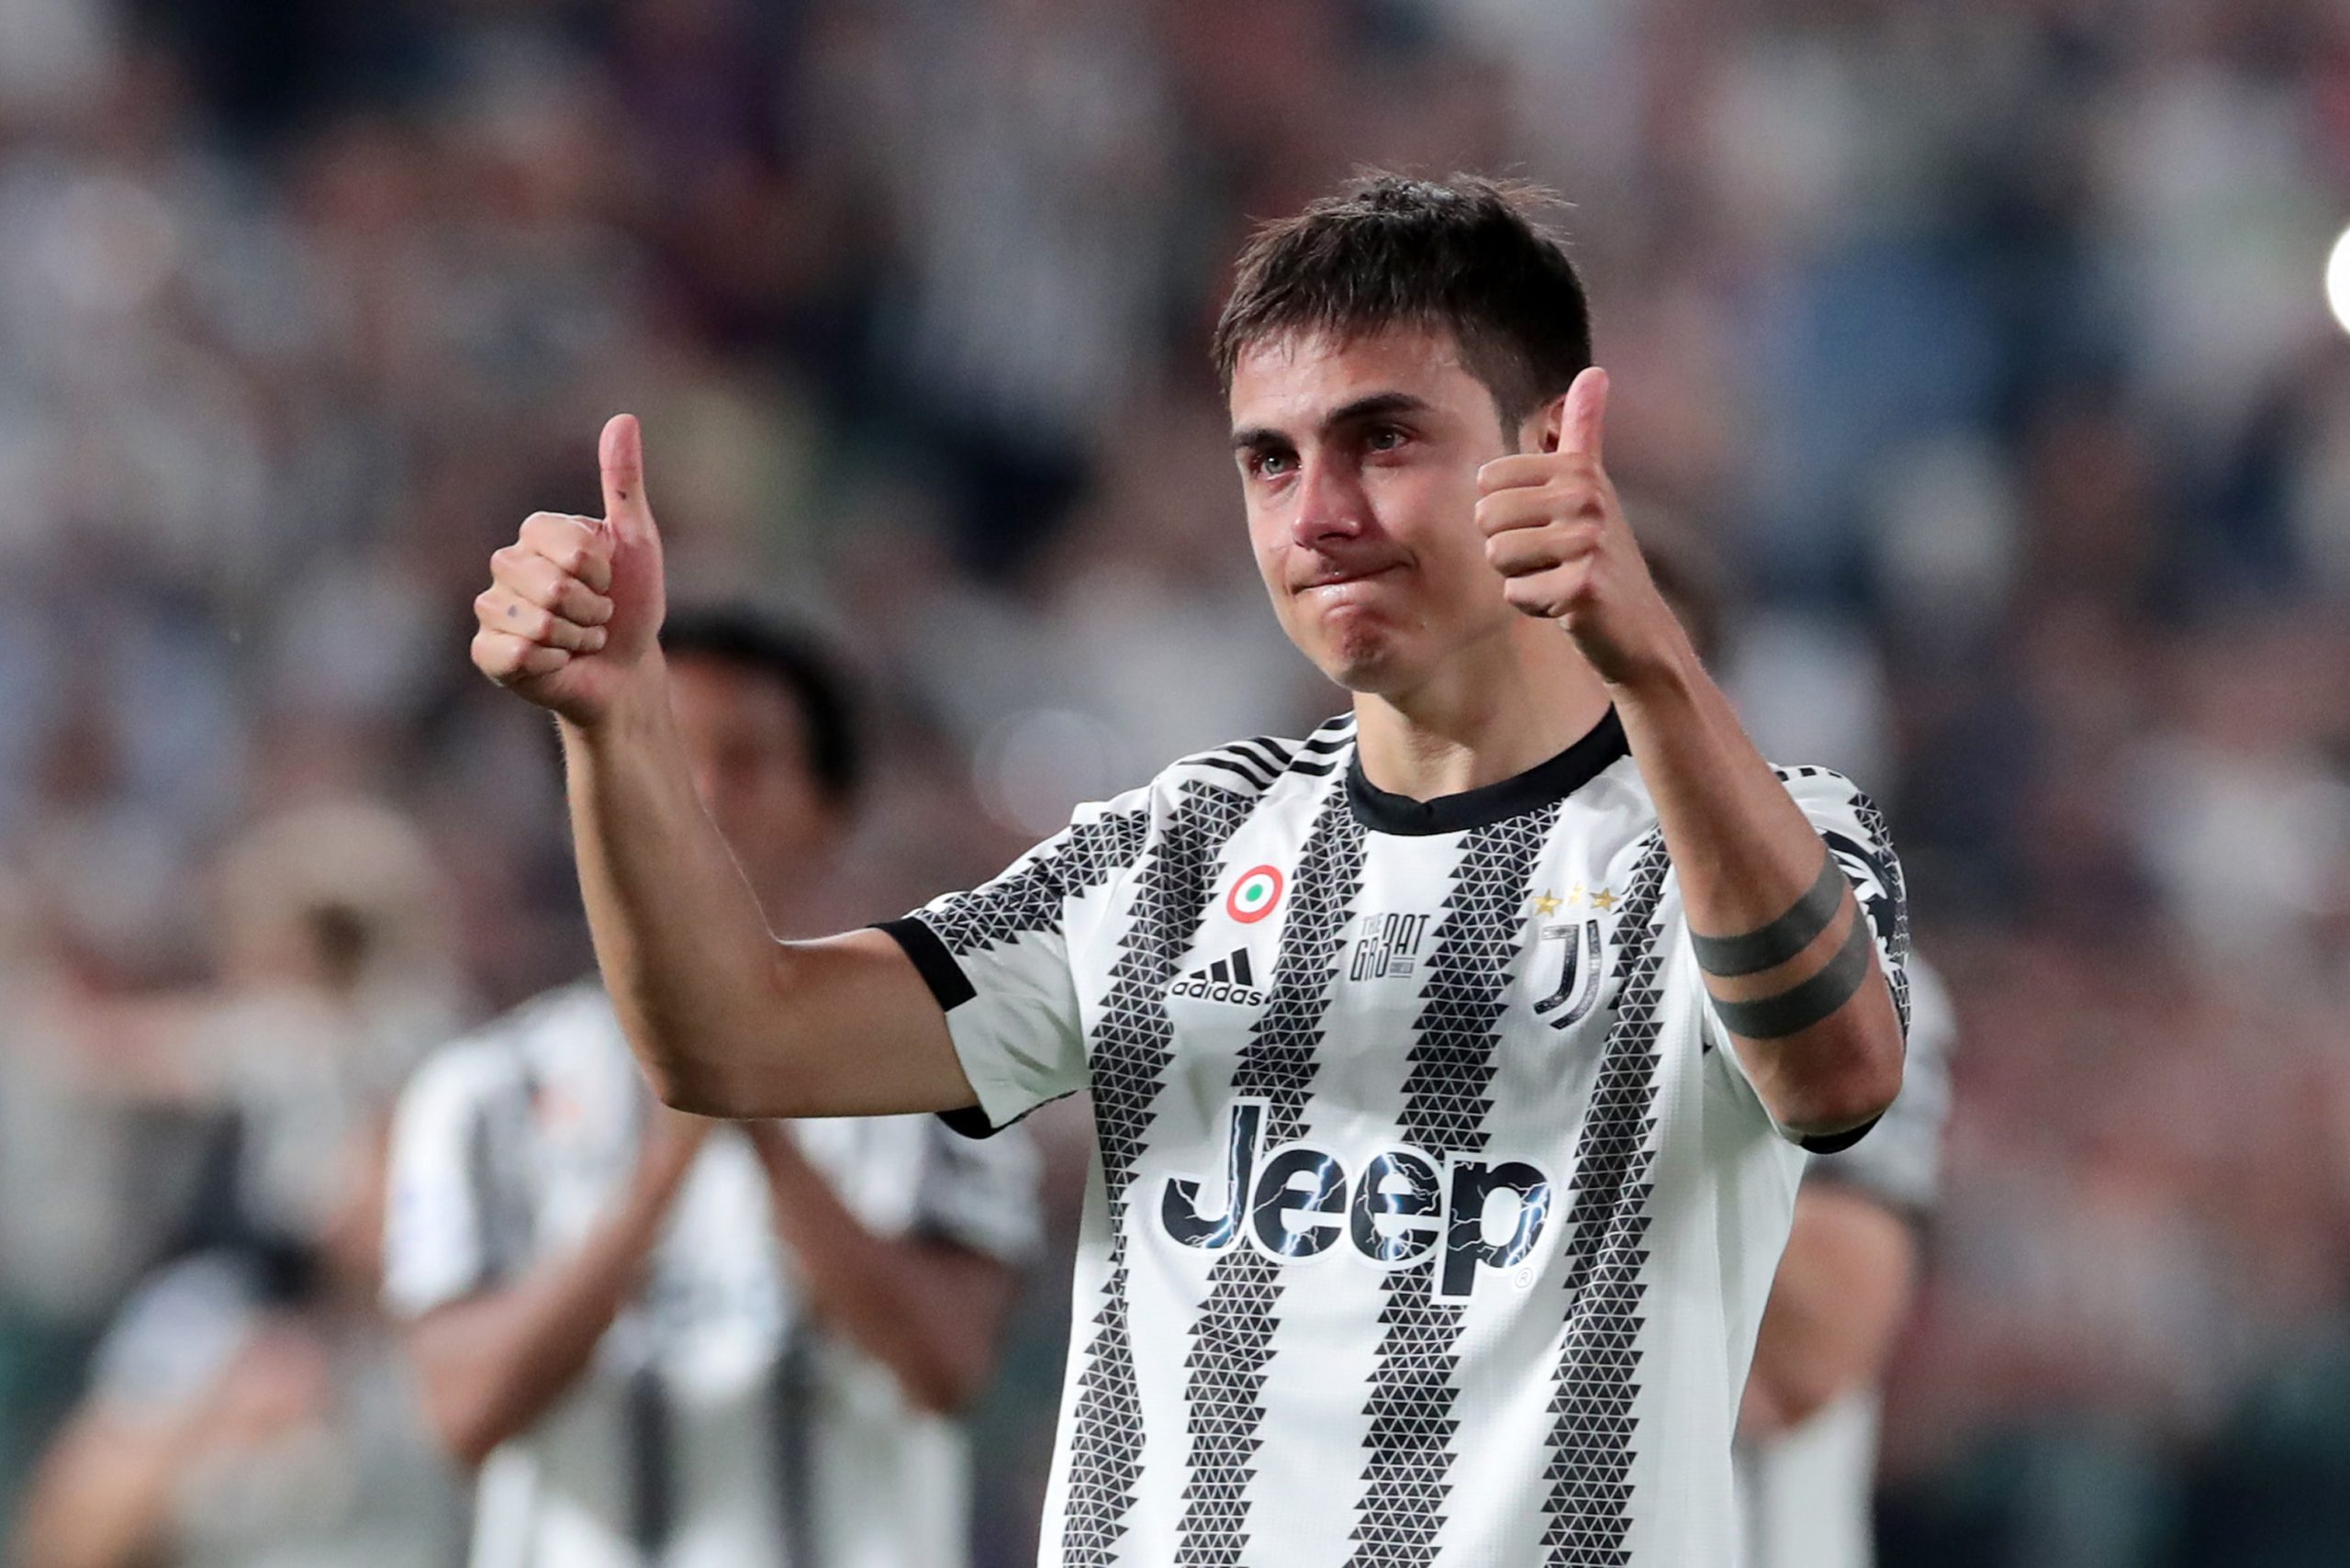 Paulo Dybala suggests he will remain in Italy amidst Tottenham Hotspur transfer links.